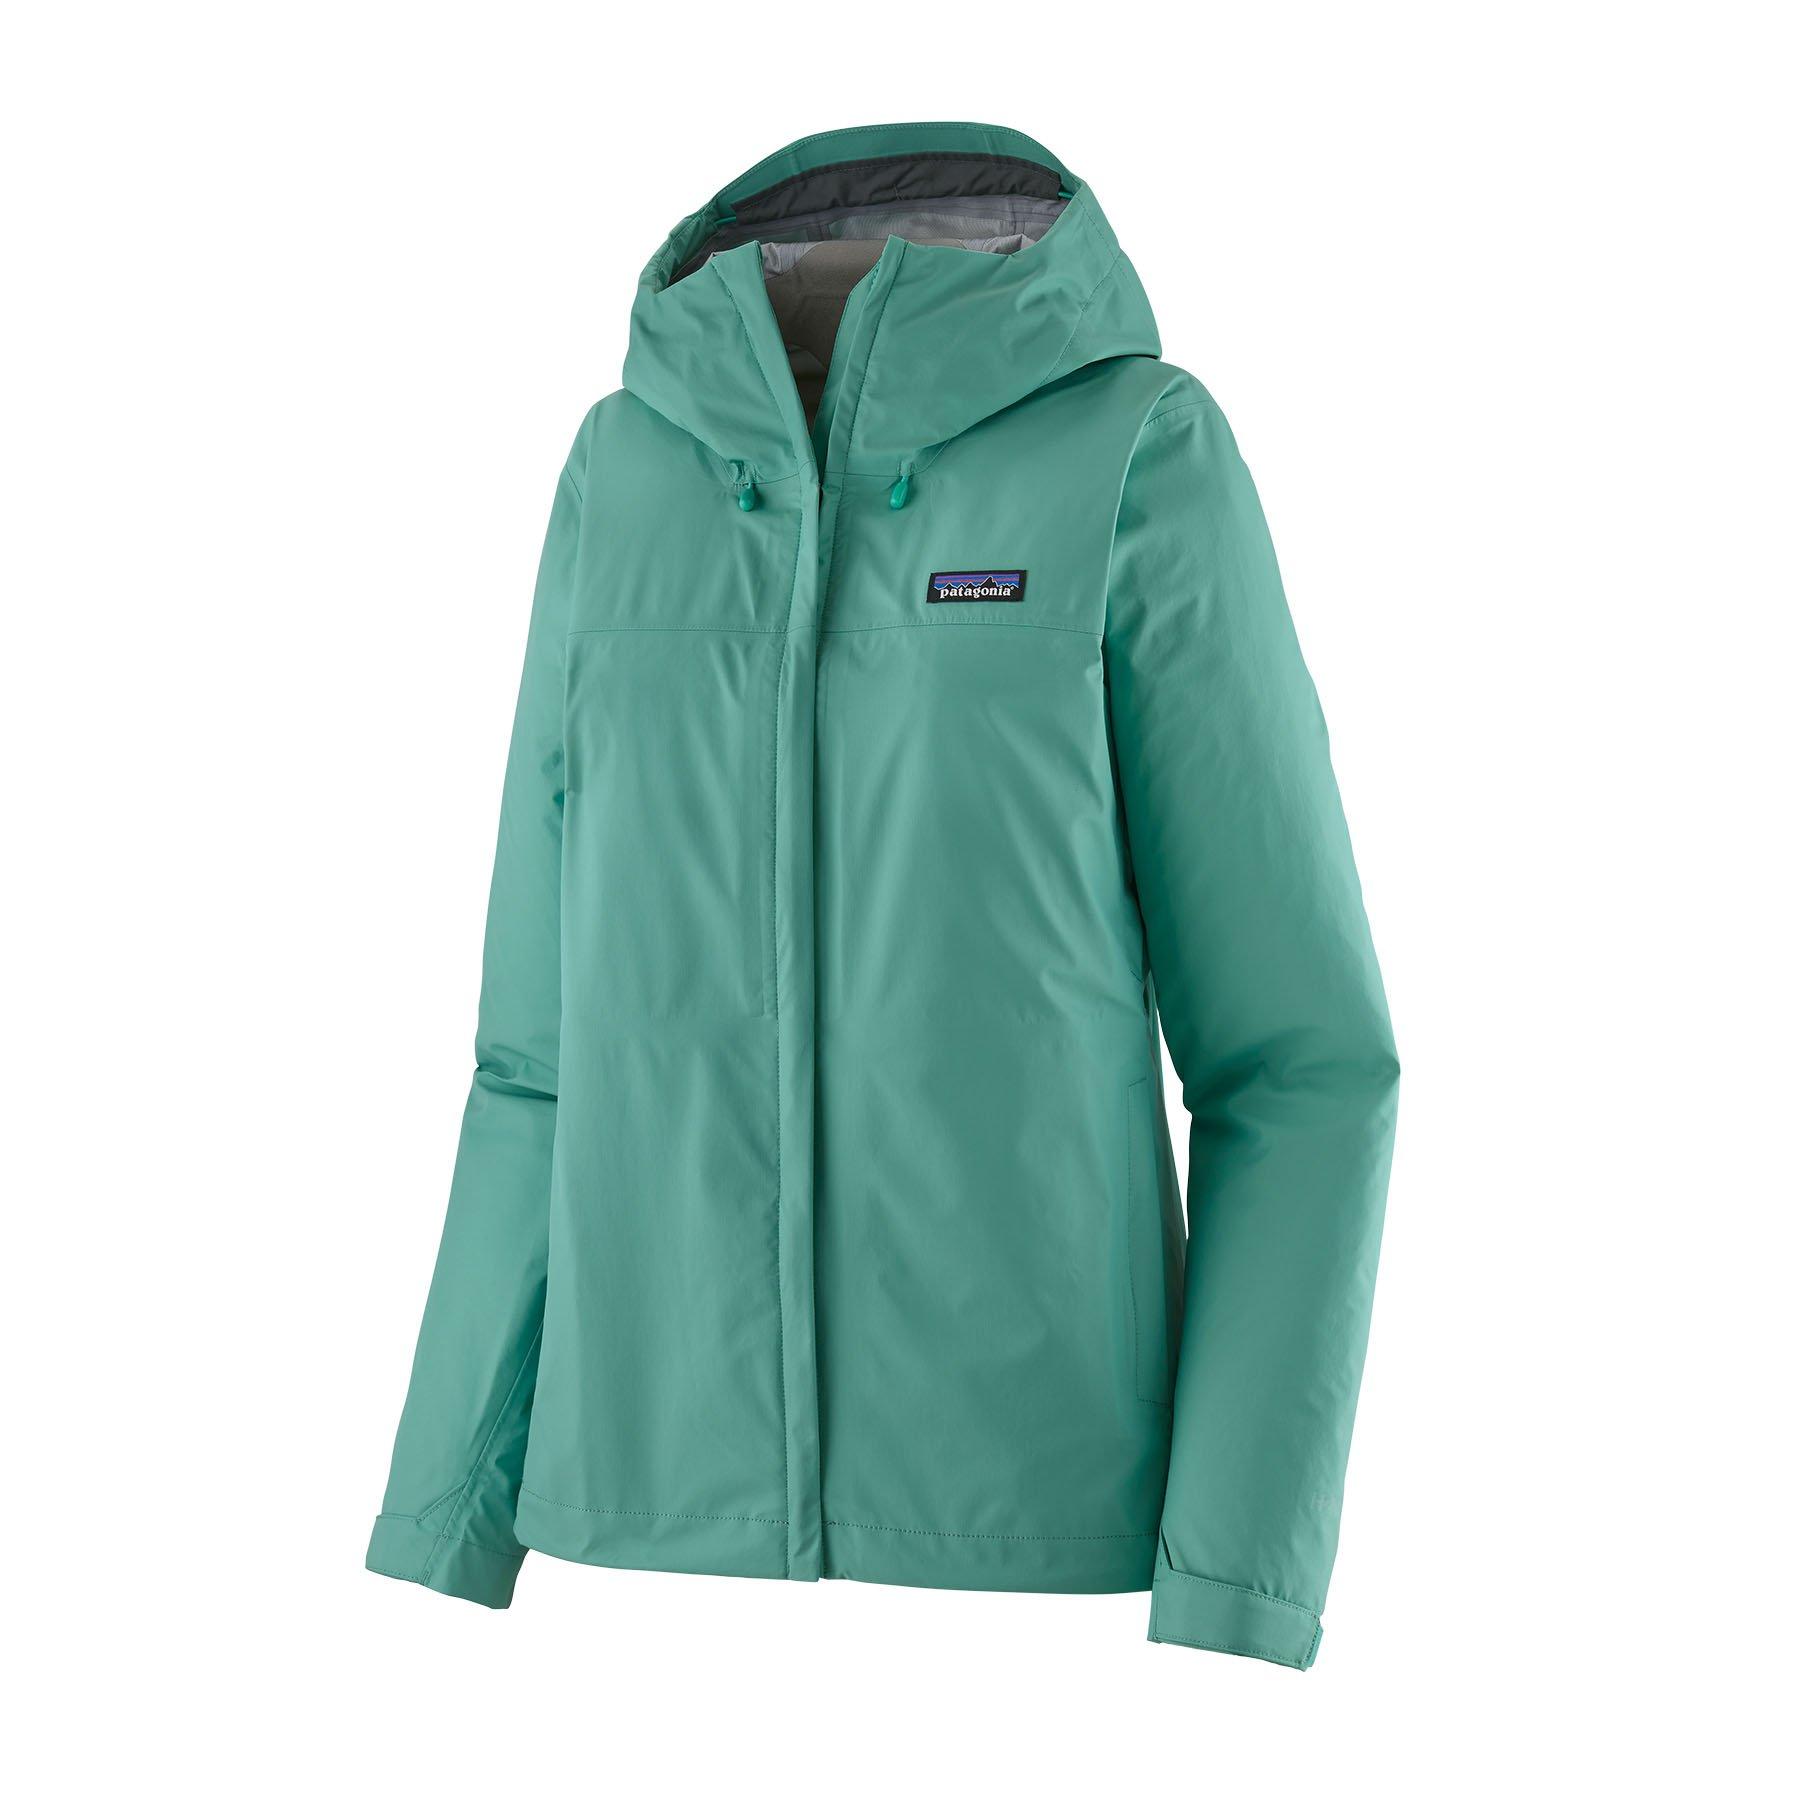 Patagonia Women's Triolet Jacket - The Epicentre, UK